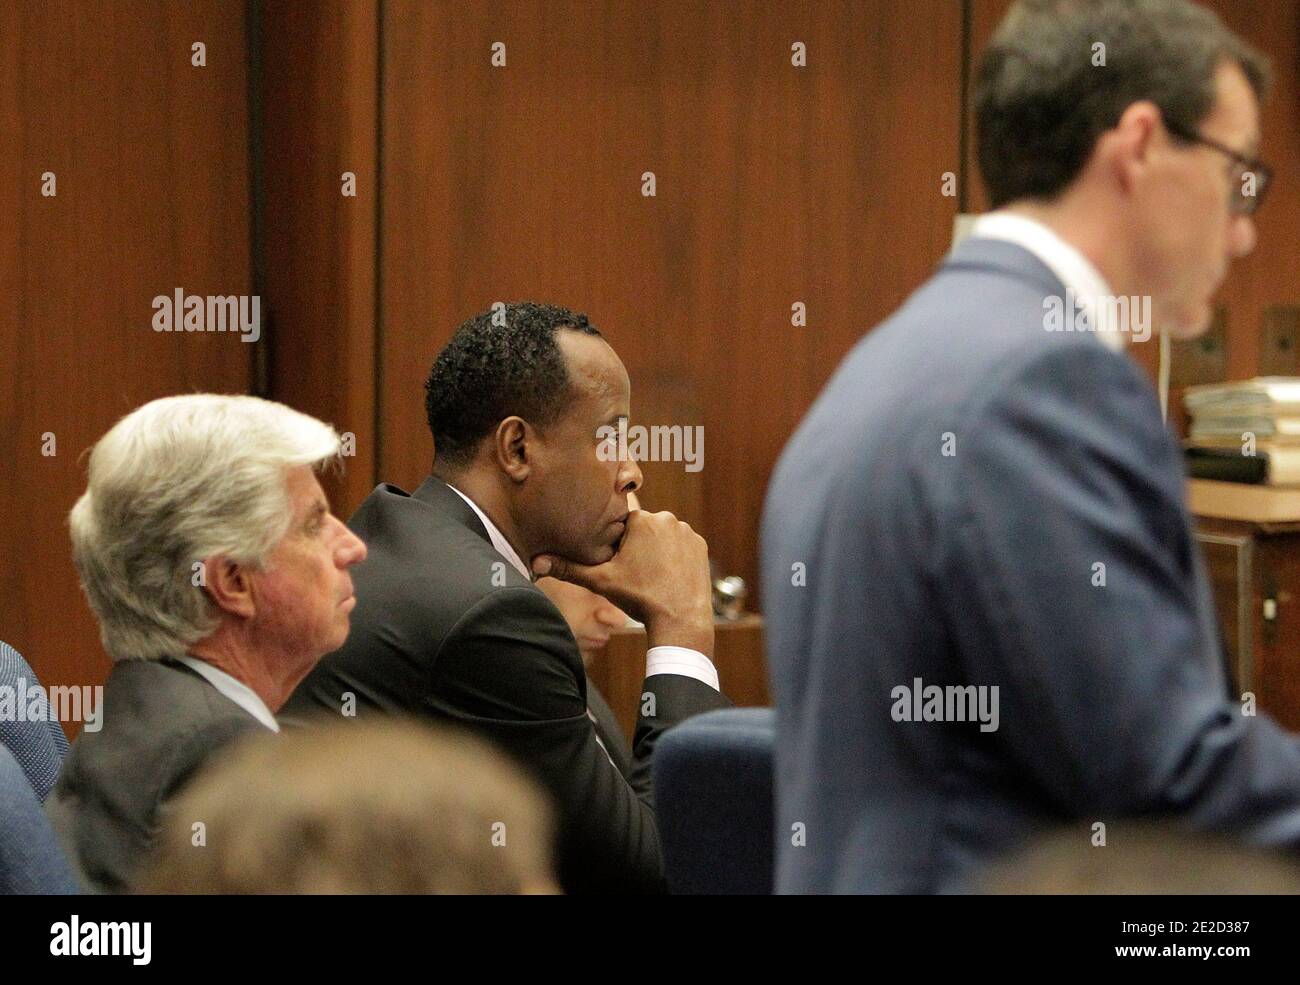 Dr. Conrad Murray, center, listens as defense attorney Ed Chernoff, foreground, cross examines anesthesiology expert Dr. Steven Shafer, during Murray's involuntary manslaughter trial in Los Angeles, CA, USA, on October 21, 2011. Murray has pleaded not guilty and faces four years in prison and the loss of his medical license if convicted of involuntary manslaughter in Michael Jackson's death. Photo by Reed Saxon/Pool/ABACAPRESS.COM Stock Photo